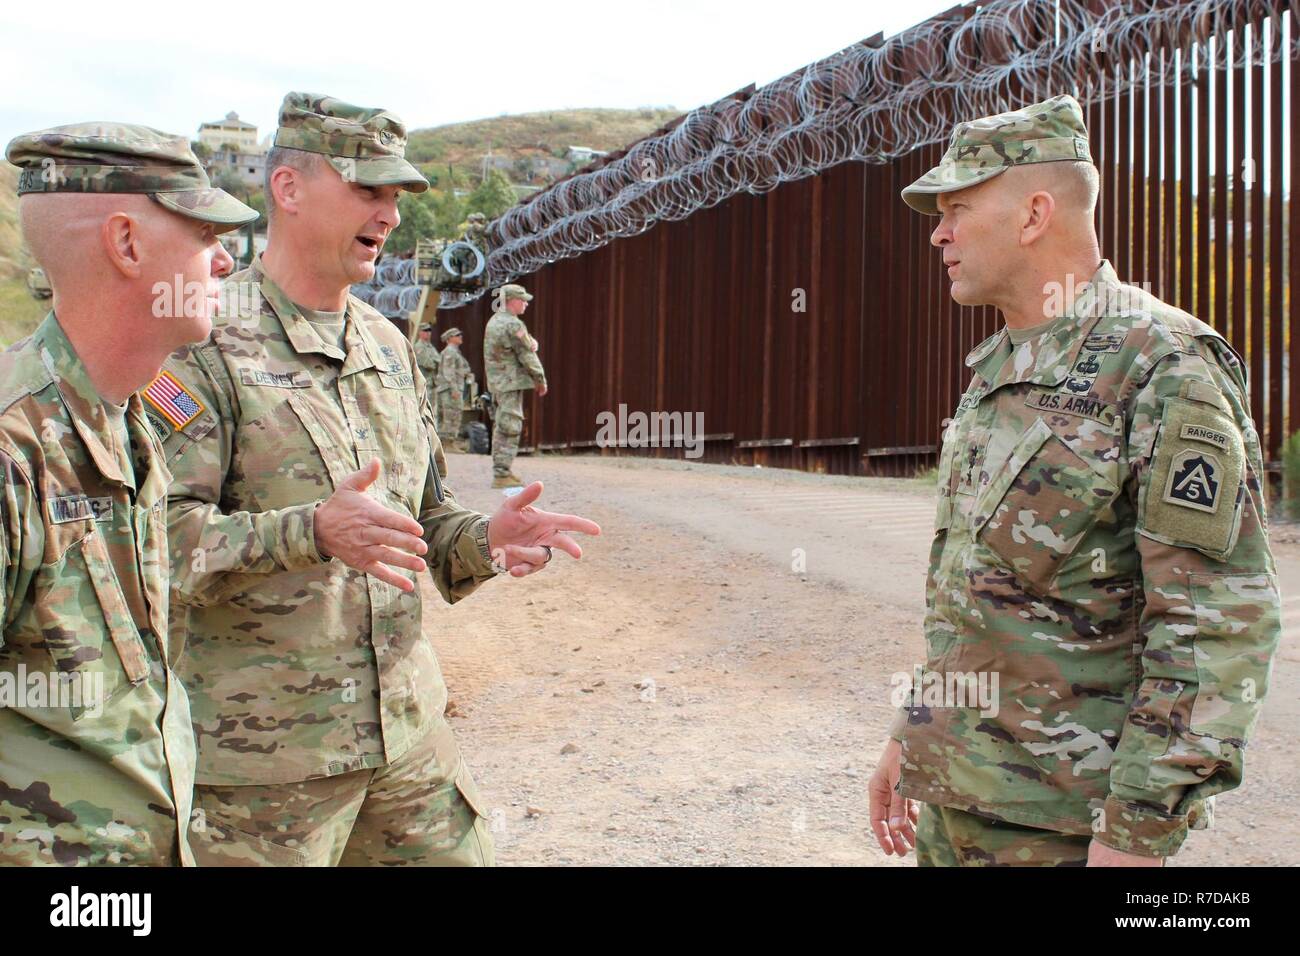 Col. Larry Dewey, 16th Military Police Brigade Commander, center, talks to Lt. Gen. Jeffrey Buchanan, United States Army North Commanding General, right, and Cpt. Charles Matthews, 104th Engineer Construction Company, left, about work complete on the border wall near Nogales, Arizona, Nov. 29, 2018. Northern Command is providing military support to the Department of Homeland Security and U.S. Customs and Border Protection to secure the southern border of the United States. Stock Photo